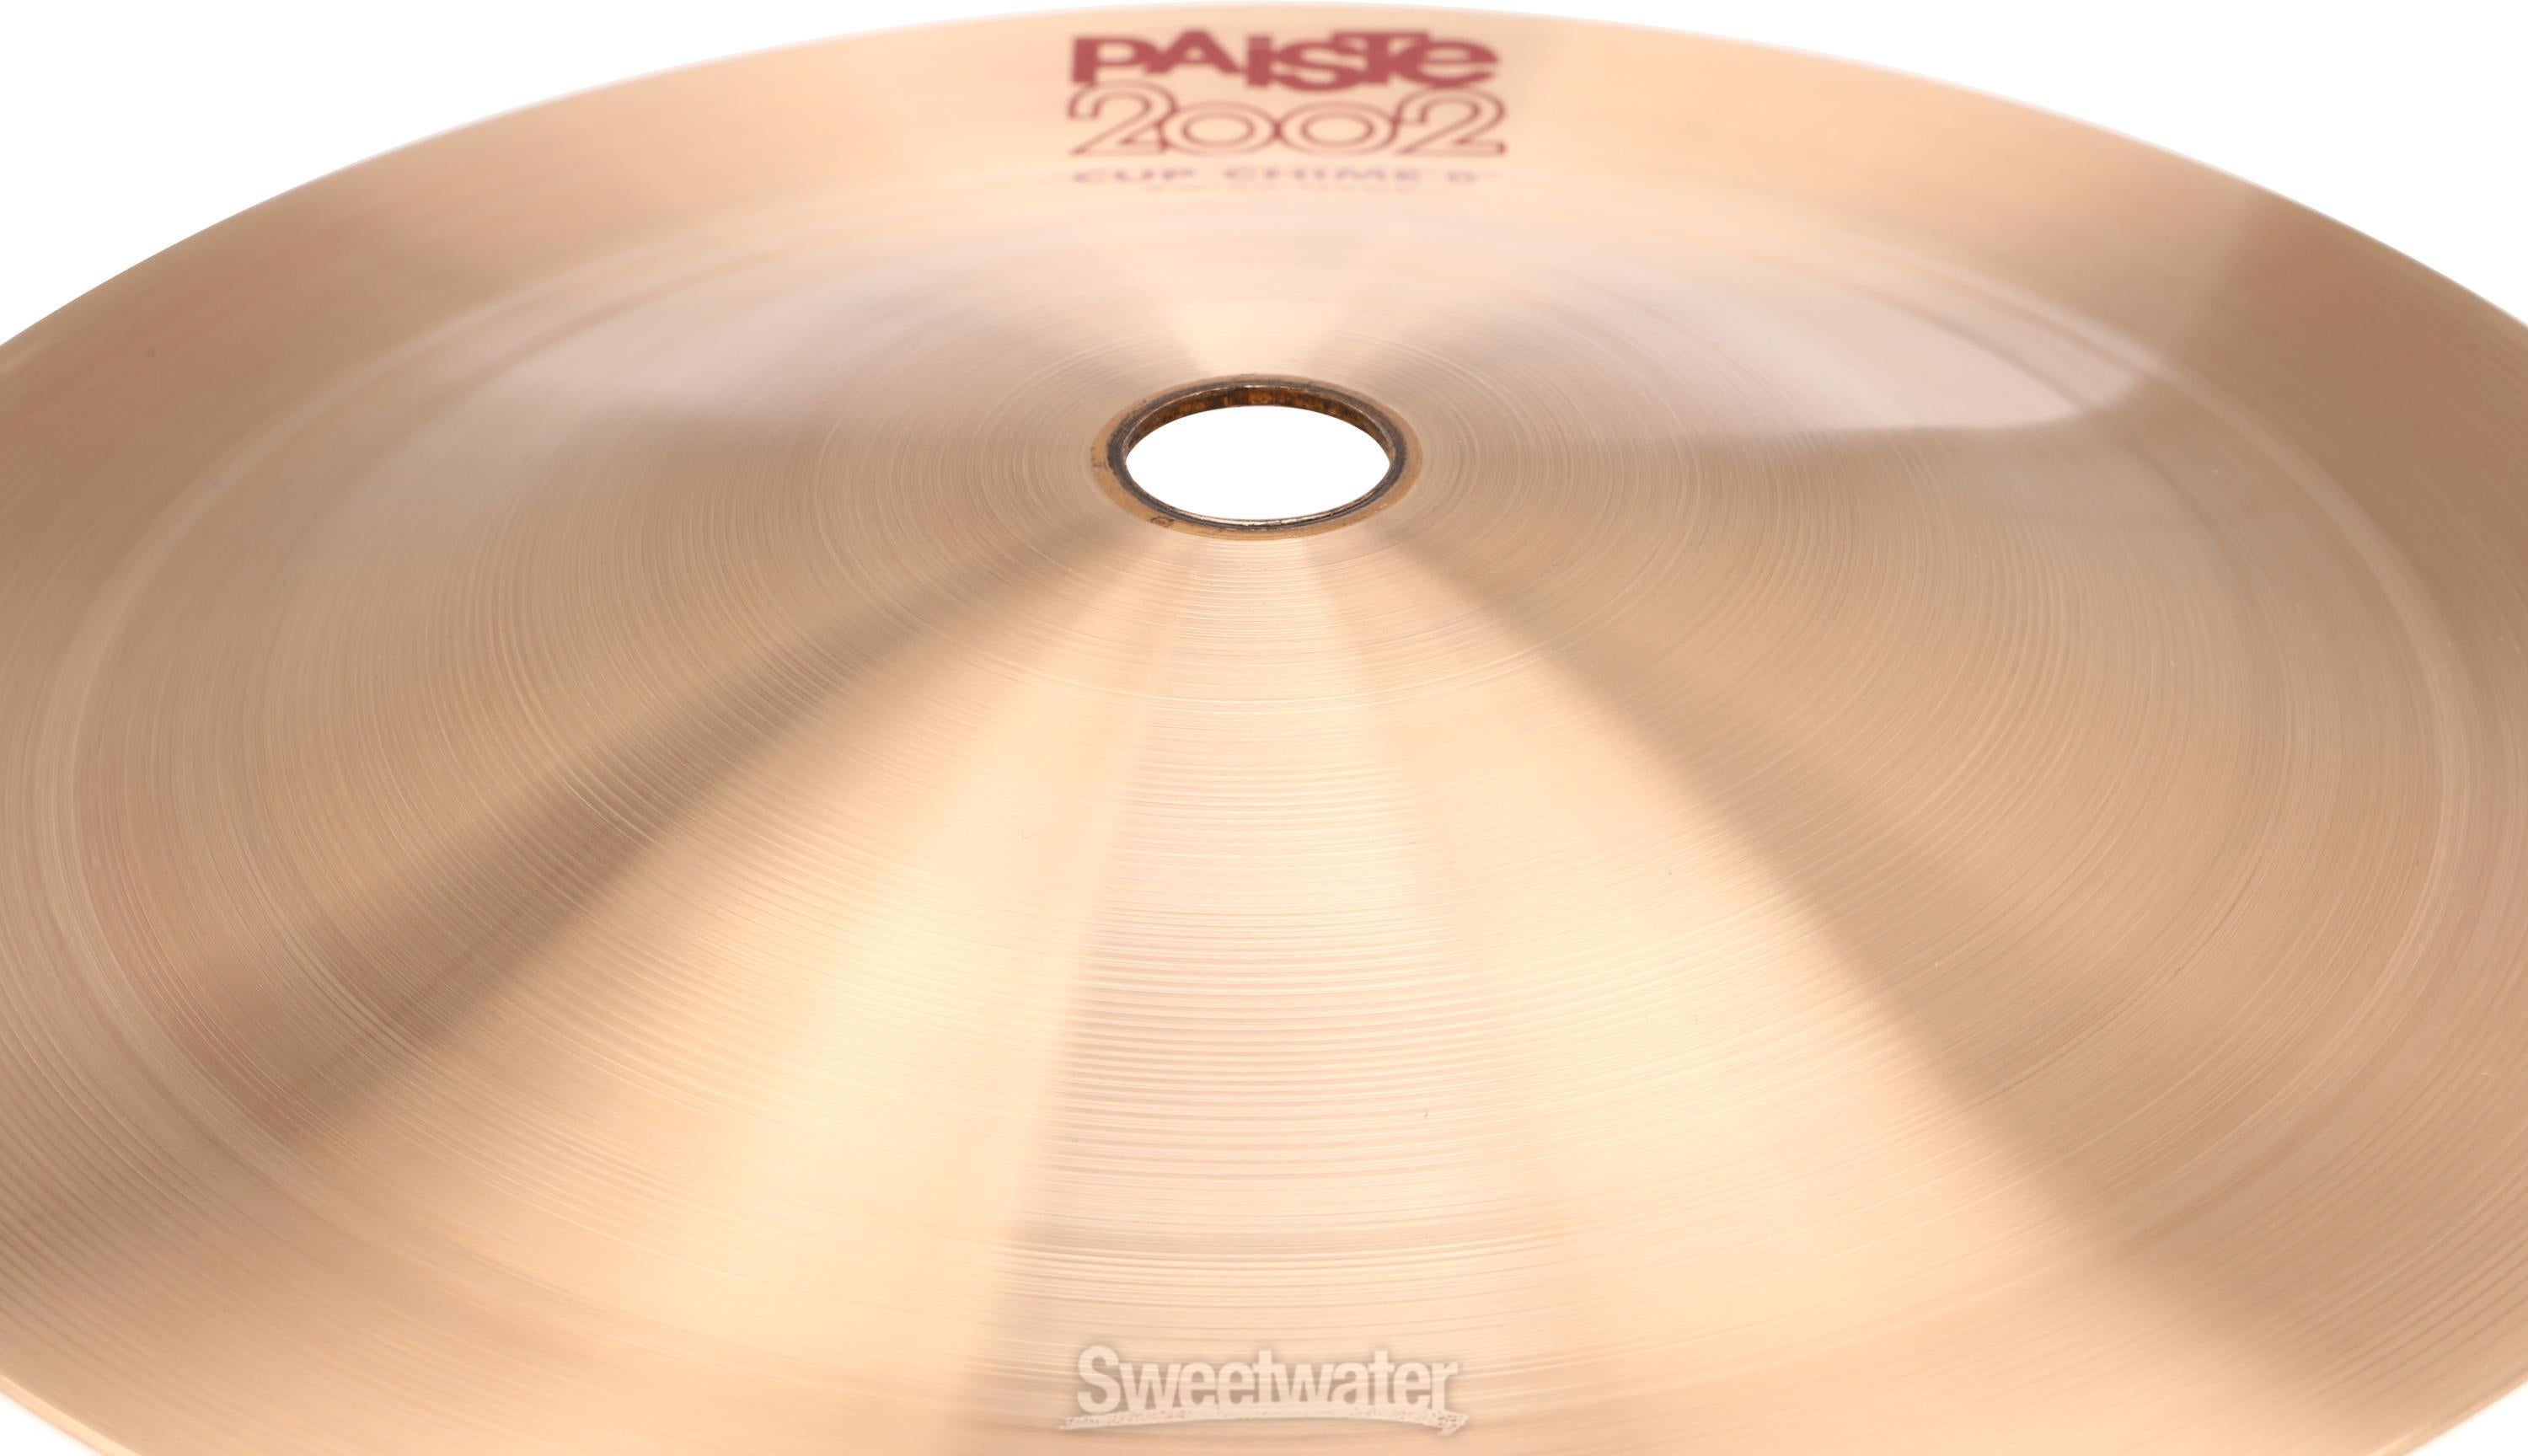 Paiste #5 2002 Cup Chime - 6 inch | Sweetwater